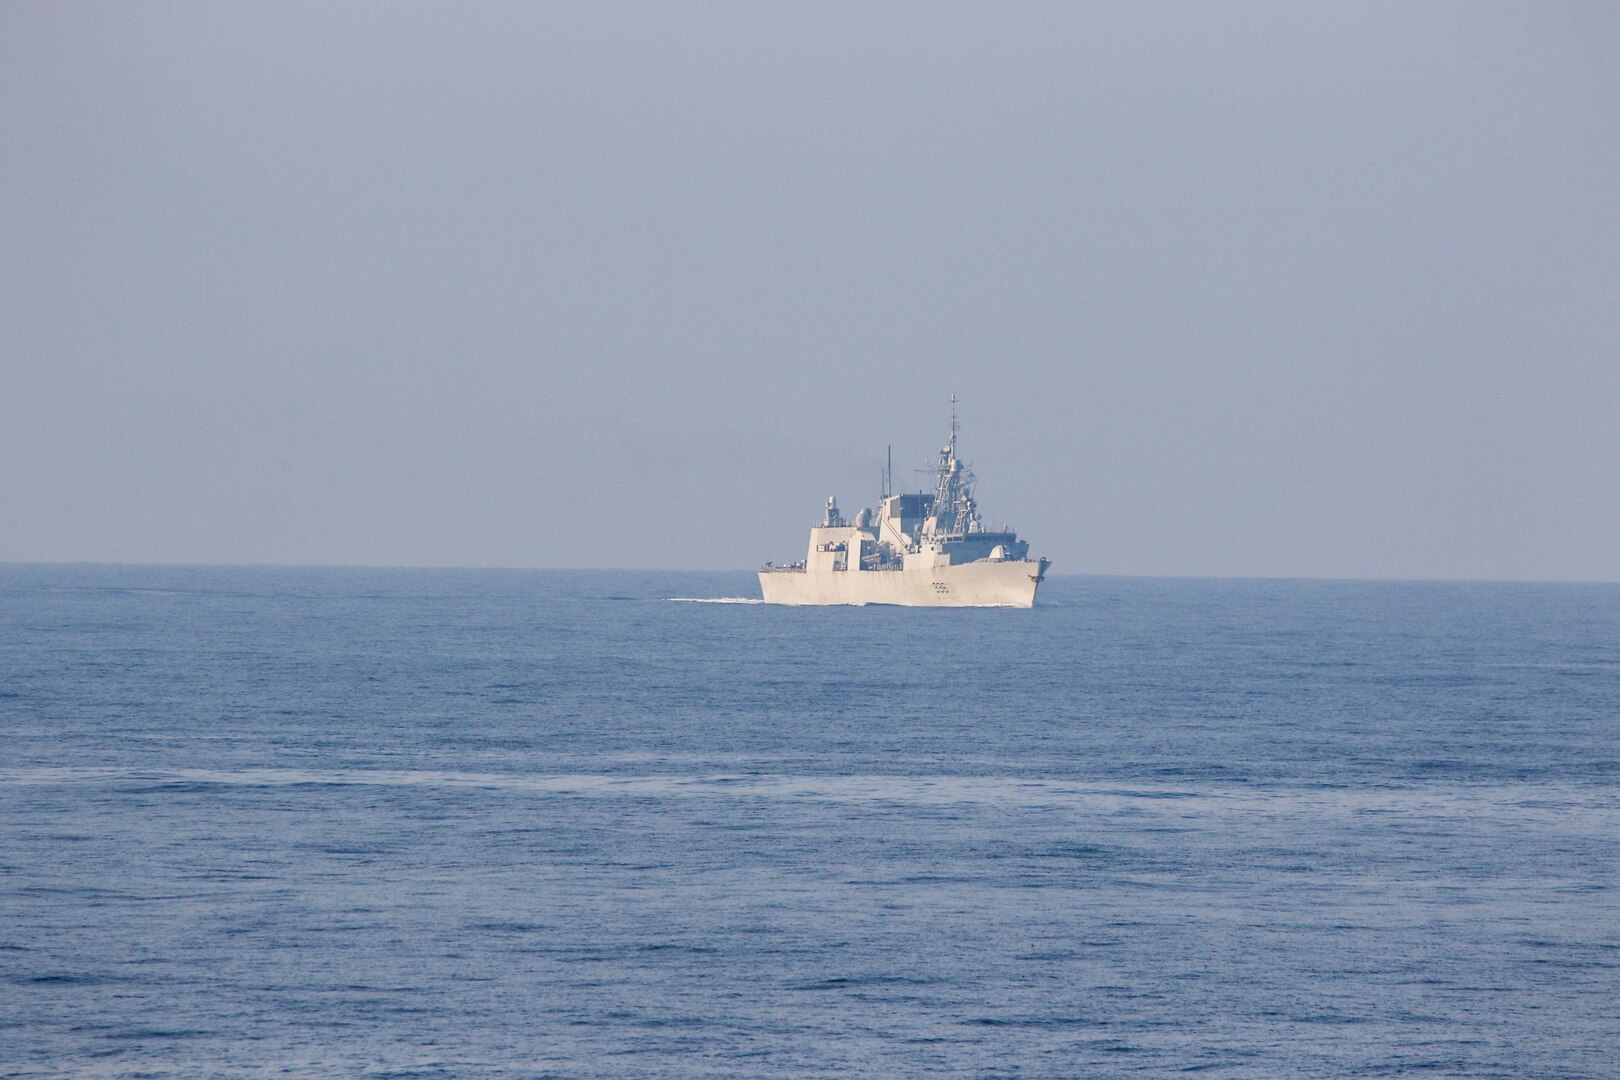 Halifax-class frigate HMCS Montreal (FFG 336) sails alongside the Arleigh Burke-class guided missile destroyer USS Chung-Hoon (DDG 93) during a transit through the Taiwan Strait. USS Chung-Hoon is on a routine deployment to U.S. 7th Fleet and is assigned to Commander, Task Force (CTF 71)/ Destroyer Squadron (DESRON) 15. CTF 71/DESRON 15 is the largest forward-deployed DESRON and the U.S. 7th Fleet’s principal surface force.